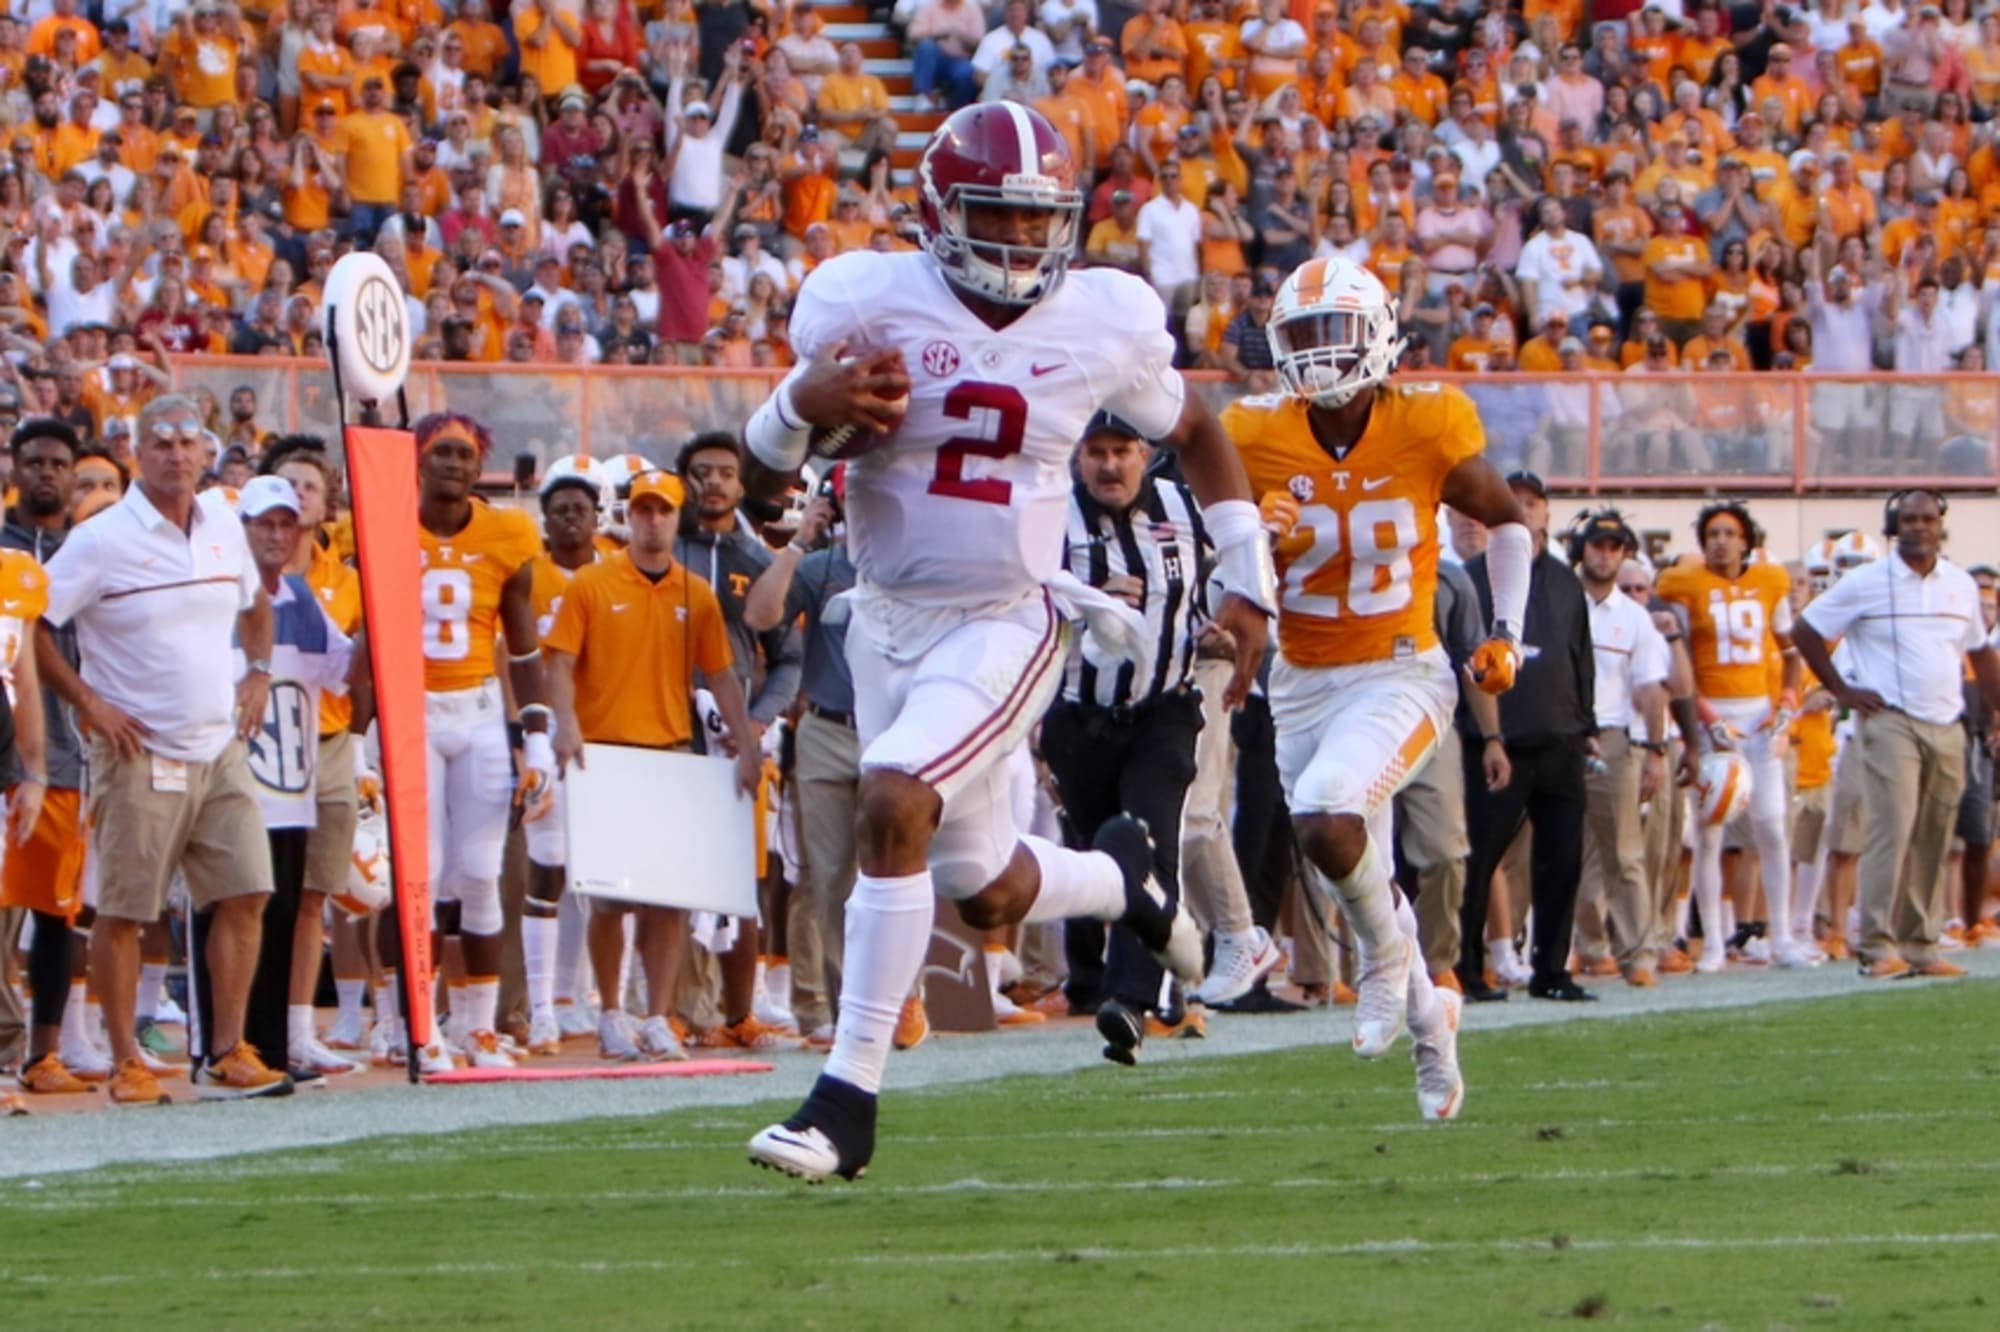 Alabama vs Tennessee Highlights, score and recap